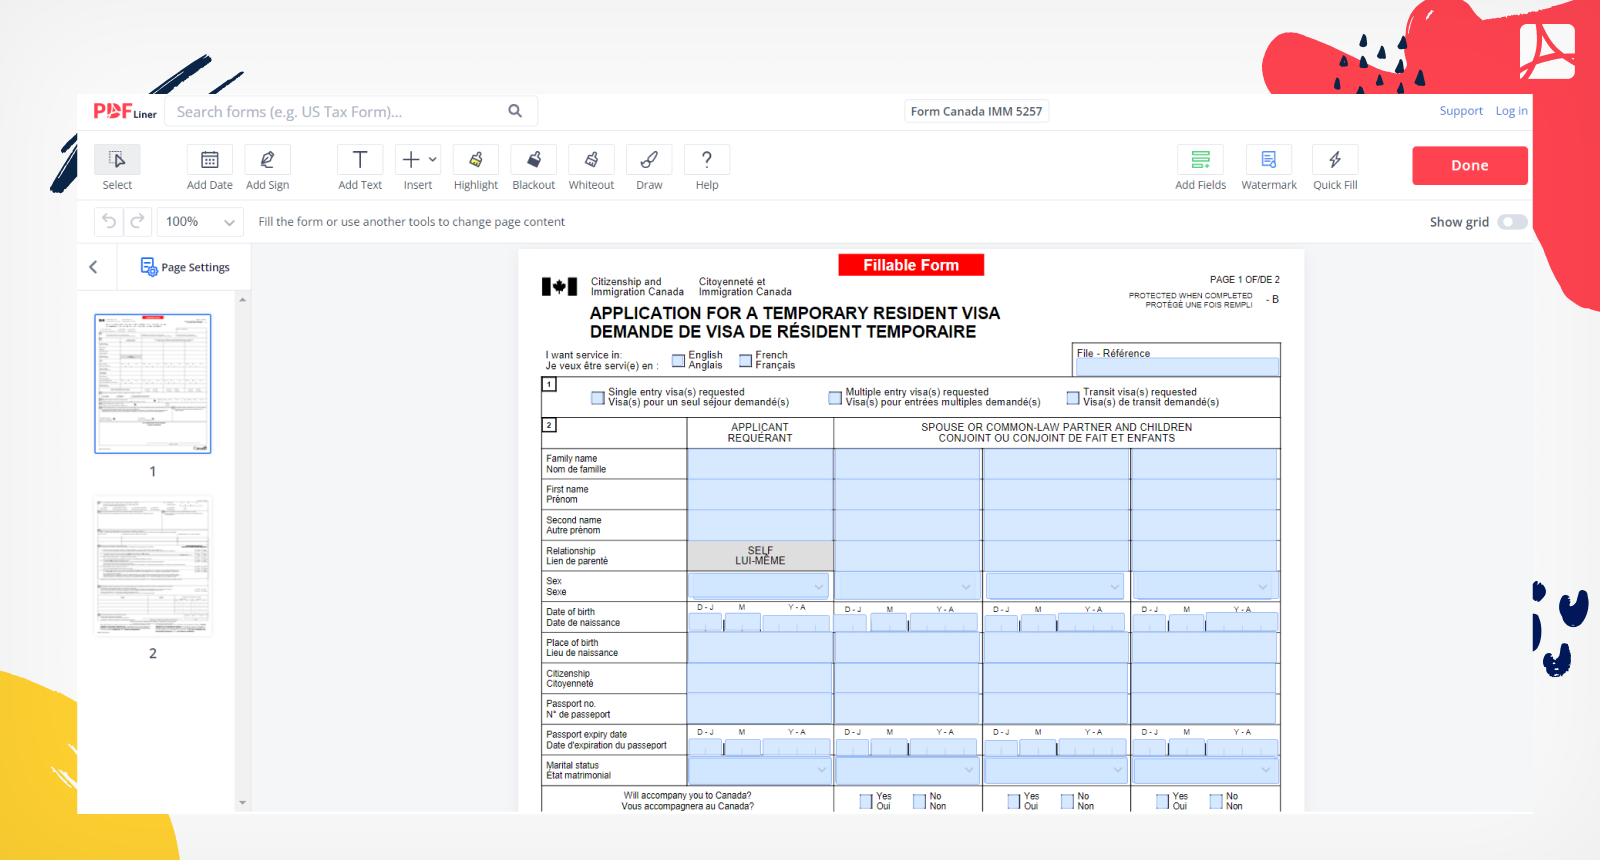 imm5257 form 2019 download